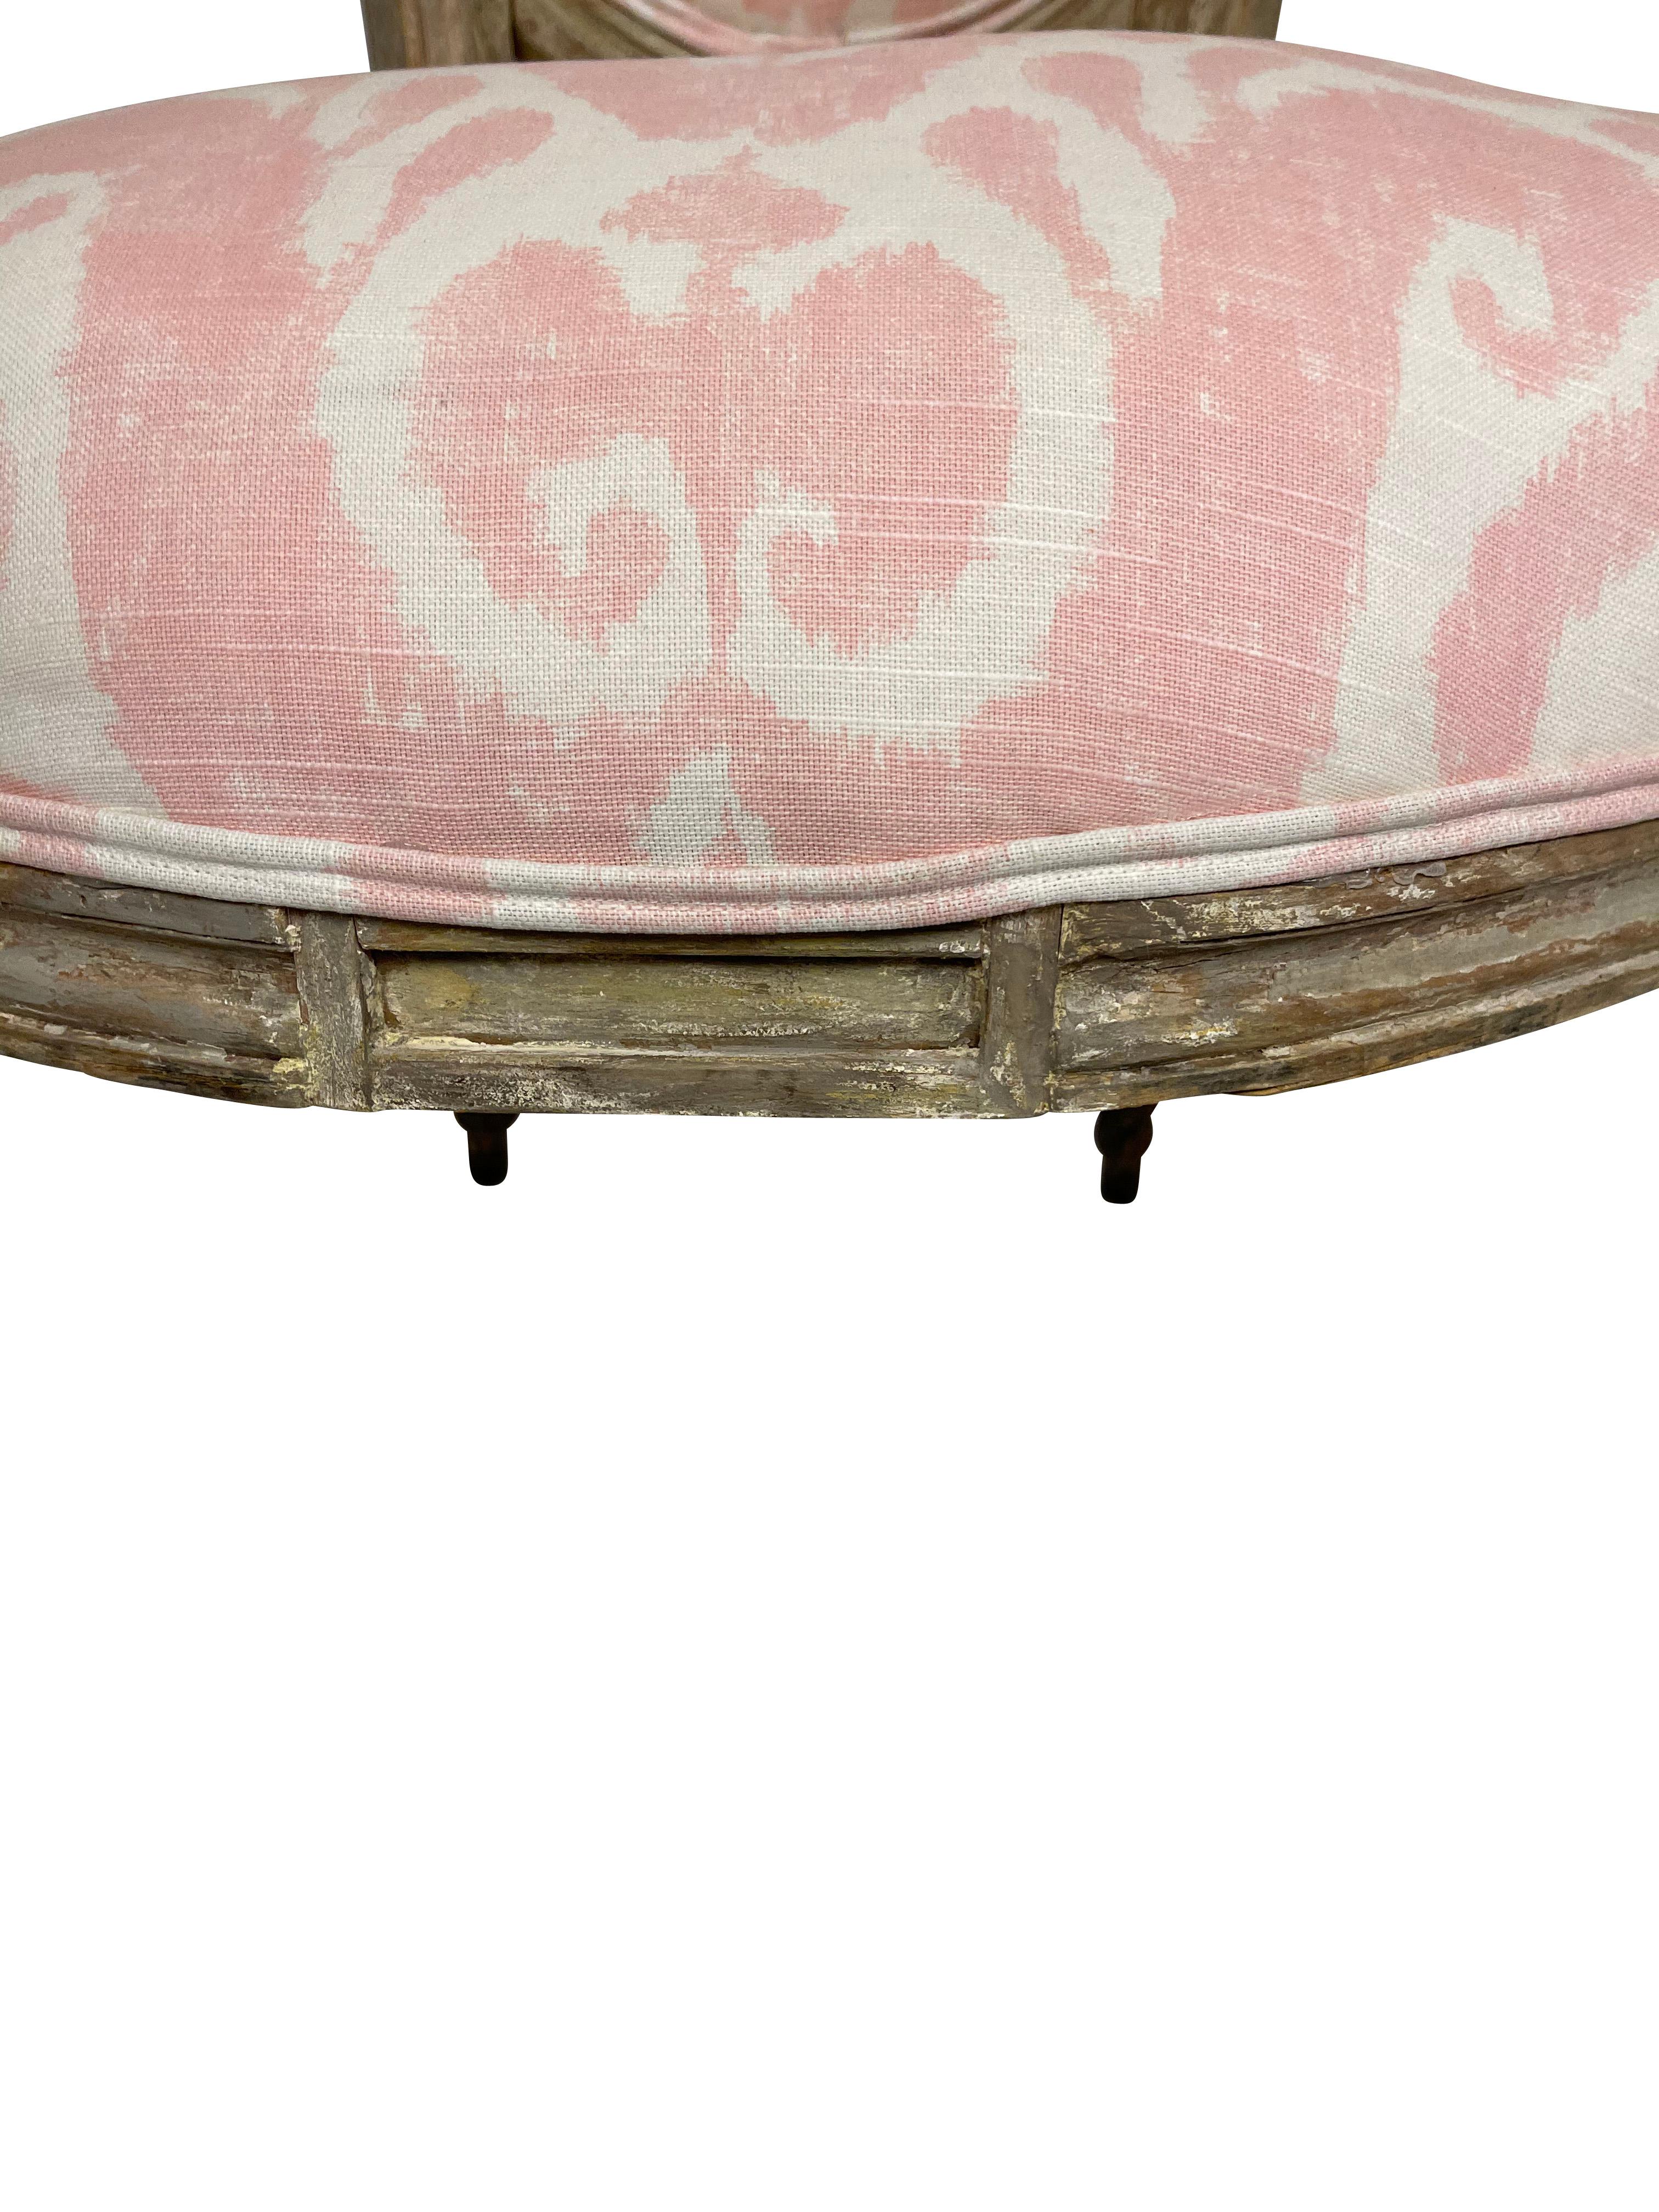 20th Century Louis XVI Style Grey Painted Armchairs in Pink and White Ikat Upholstery